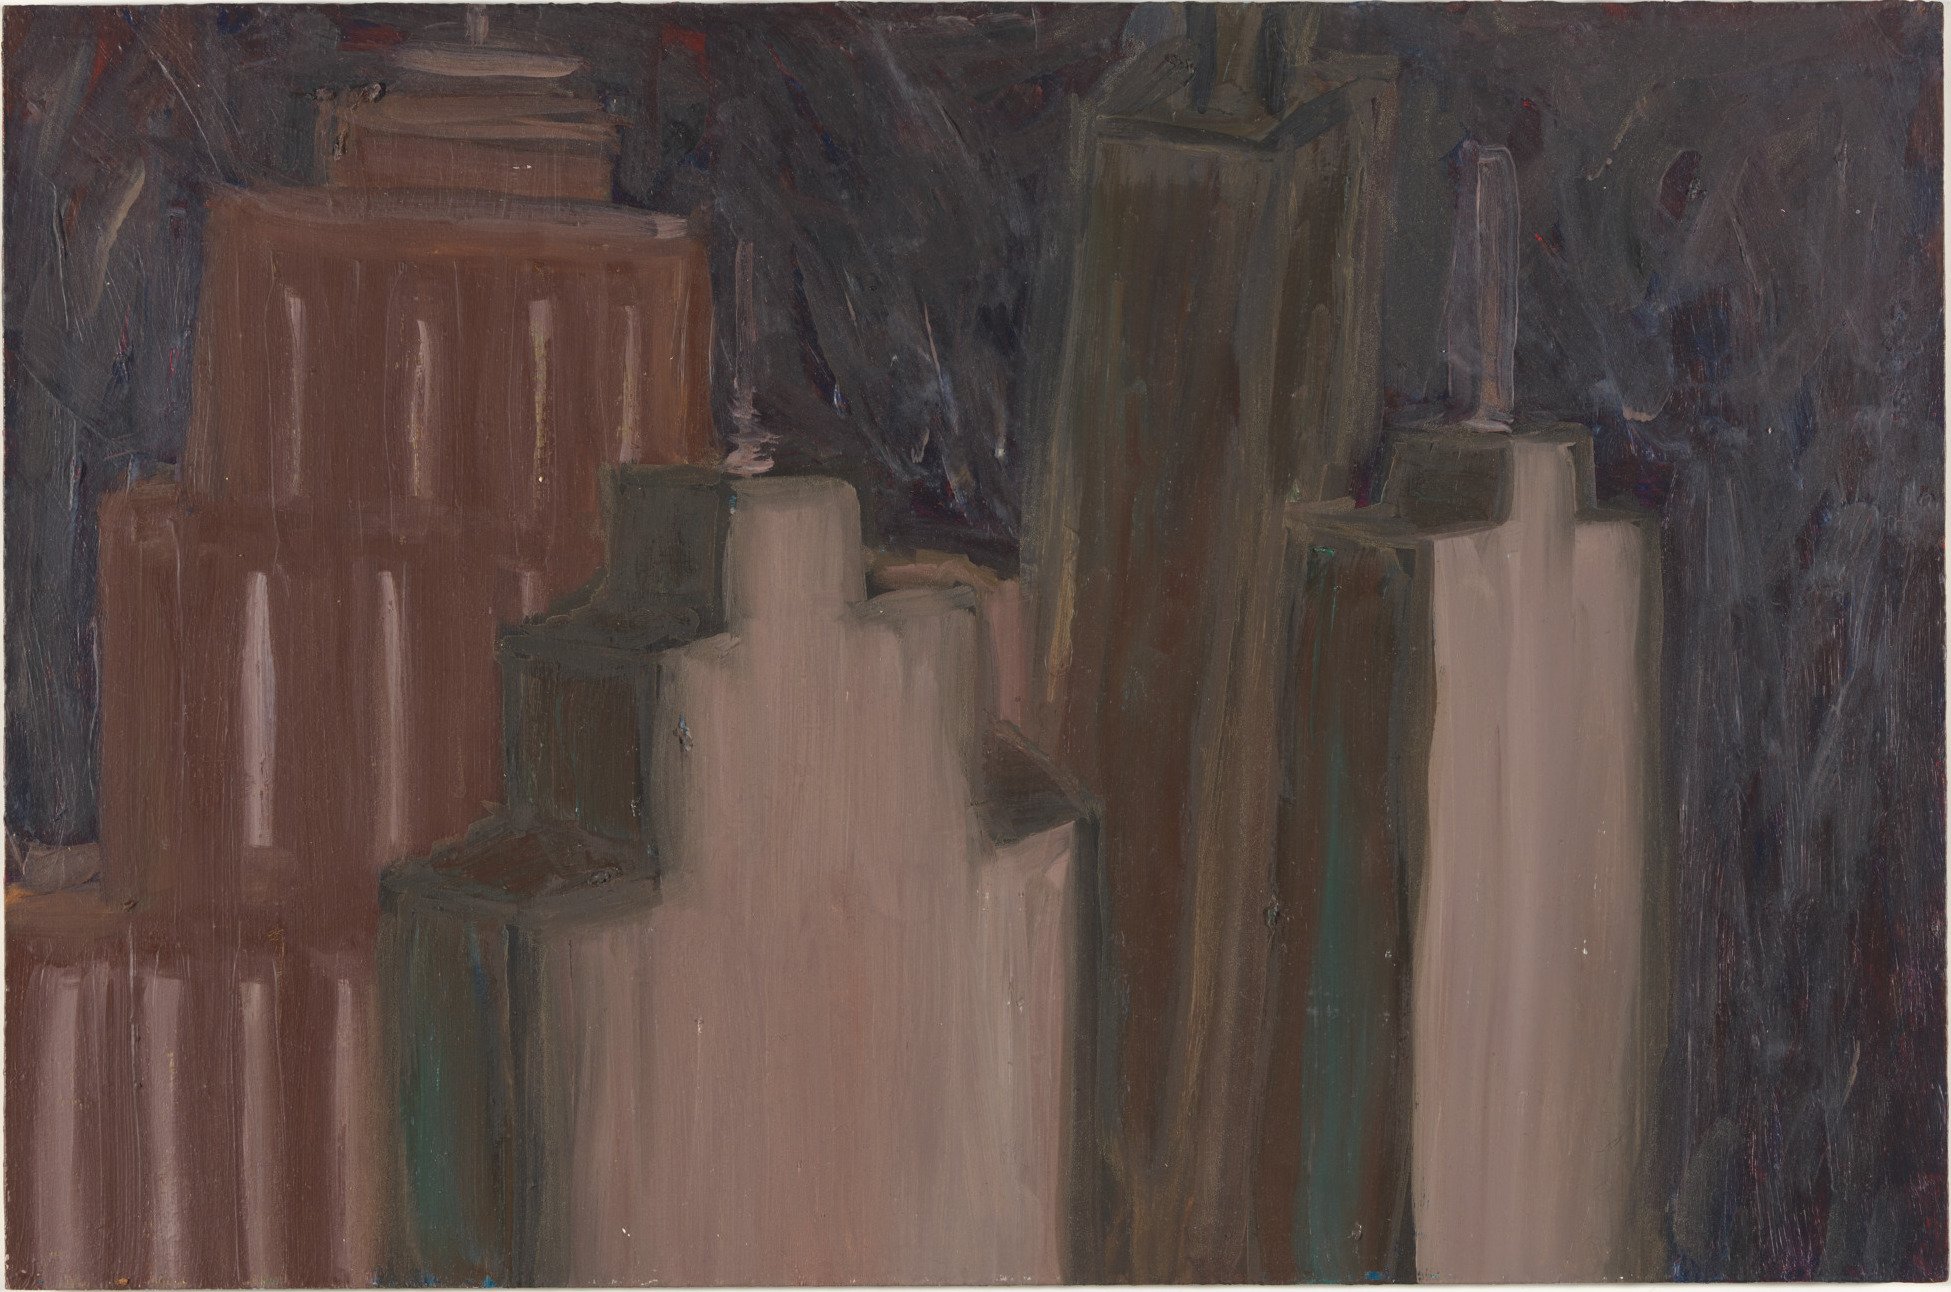   Untitled , 1980. Oil on panel. 14 x 21 in. Collection  National Gallery of Australia , Canberra 